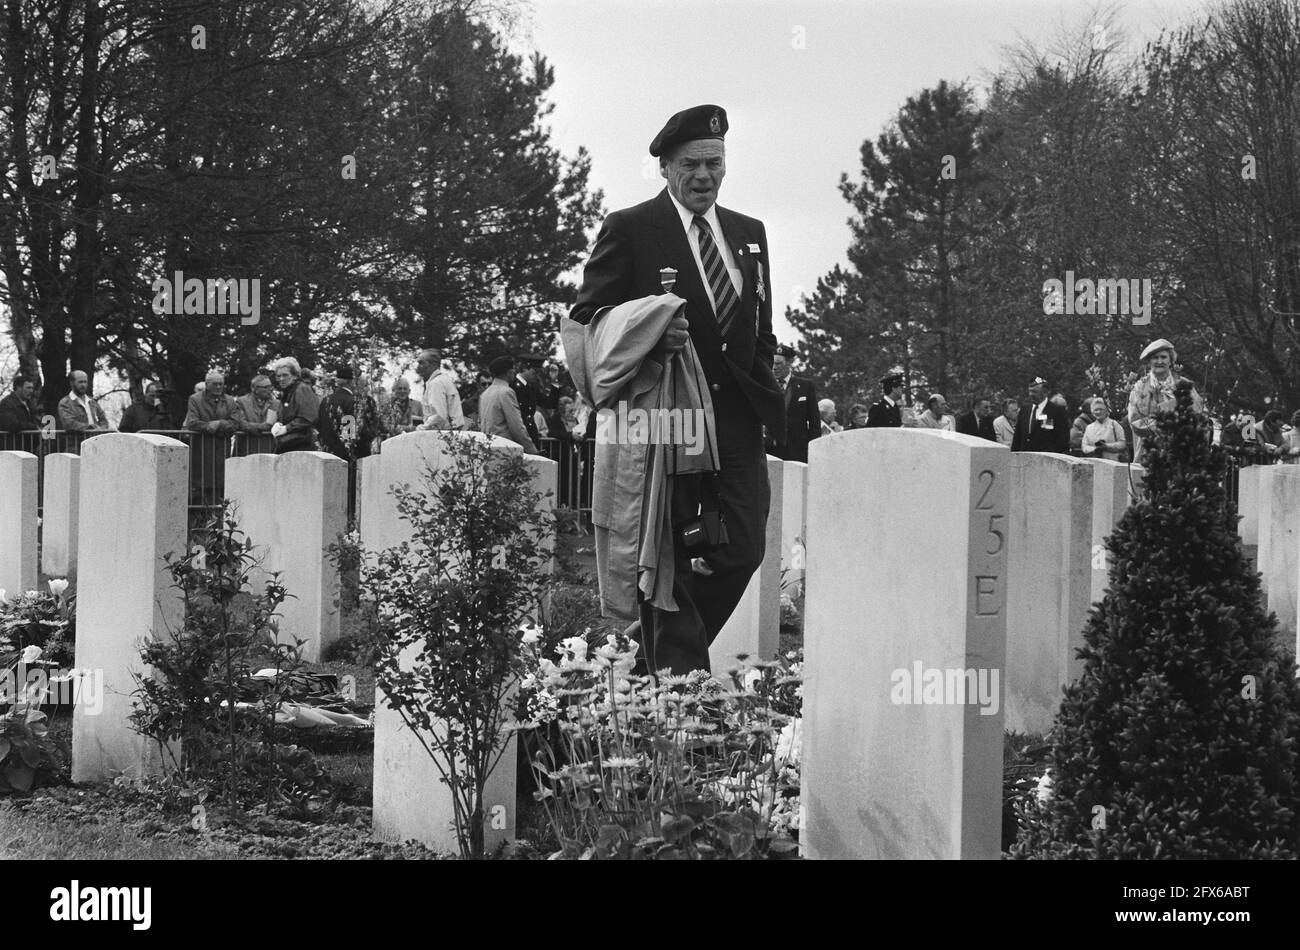 Memorial service at the Canadian War Cemetery in Groesbeek in honor of Princess Margriet, veterans photographing the graves, May 7, 1985, war cemeteries, veterans, The Netherlands, 20th century press agency photo, news to remember, documentary, historic photography 1945-1990, visual stories, human history of the Twentieth Century, capturing moments in time Stock Photo